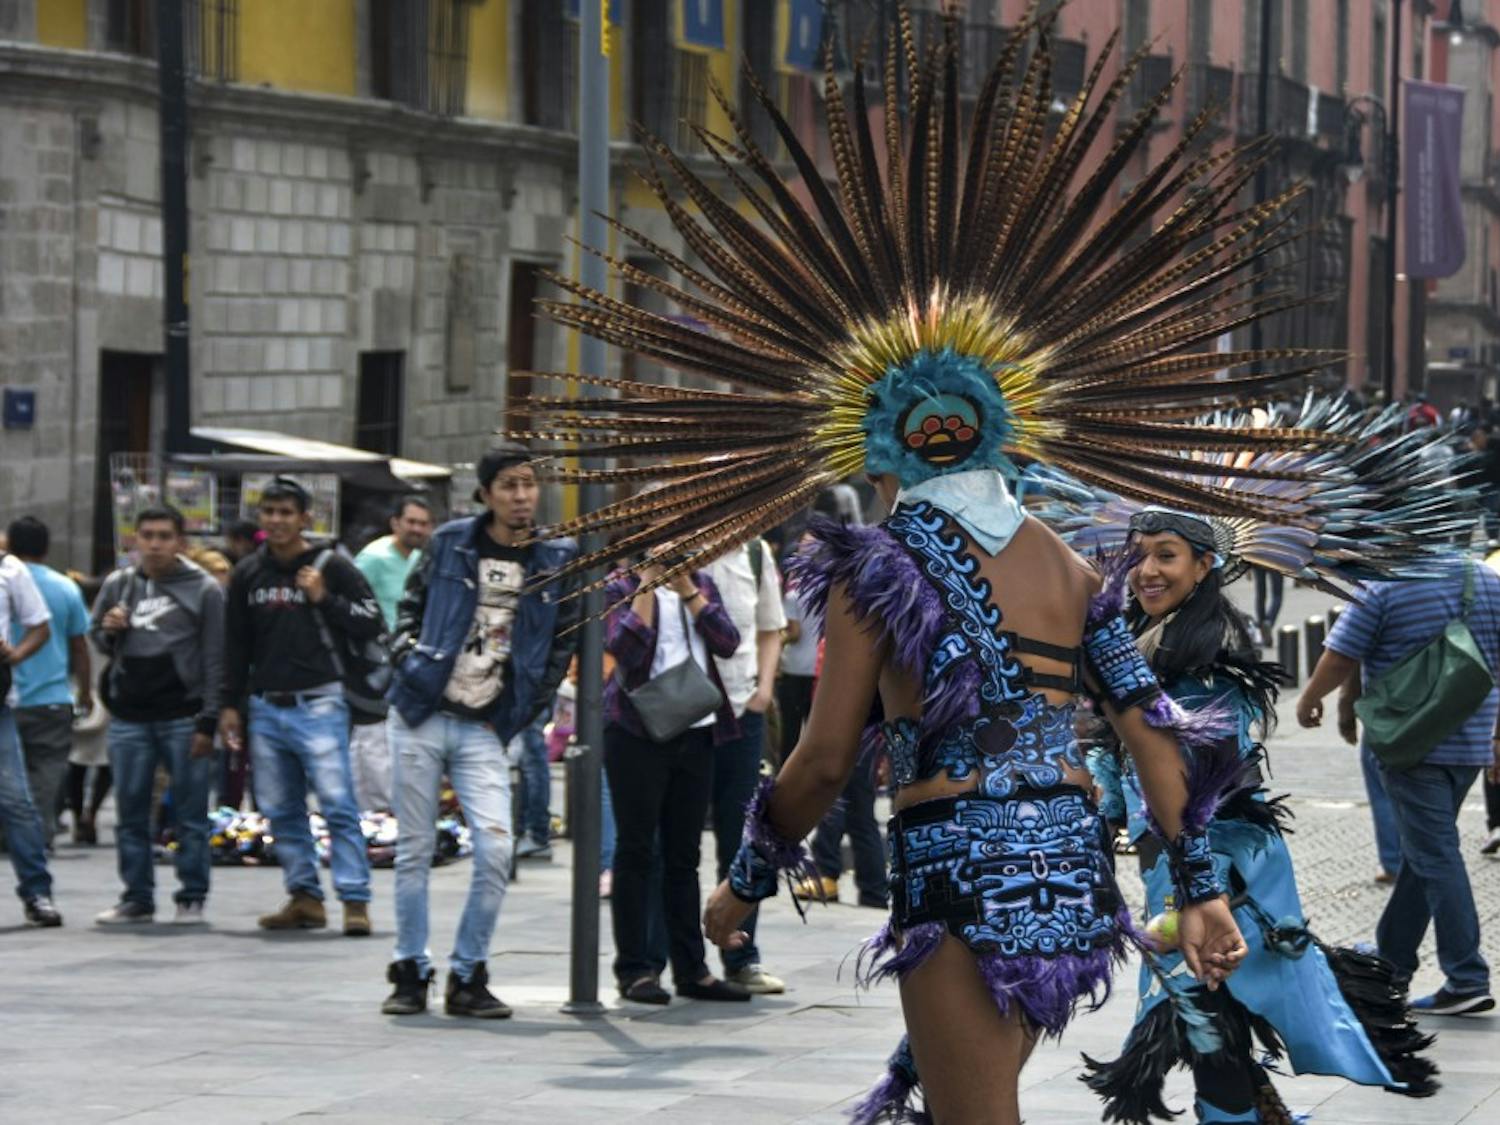 Traditional Aztec dance being performed for tourists and citizens in Mexico City July 8, 2018.